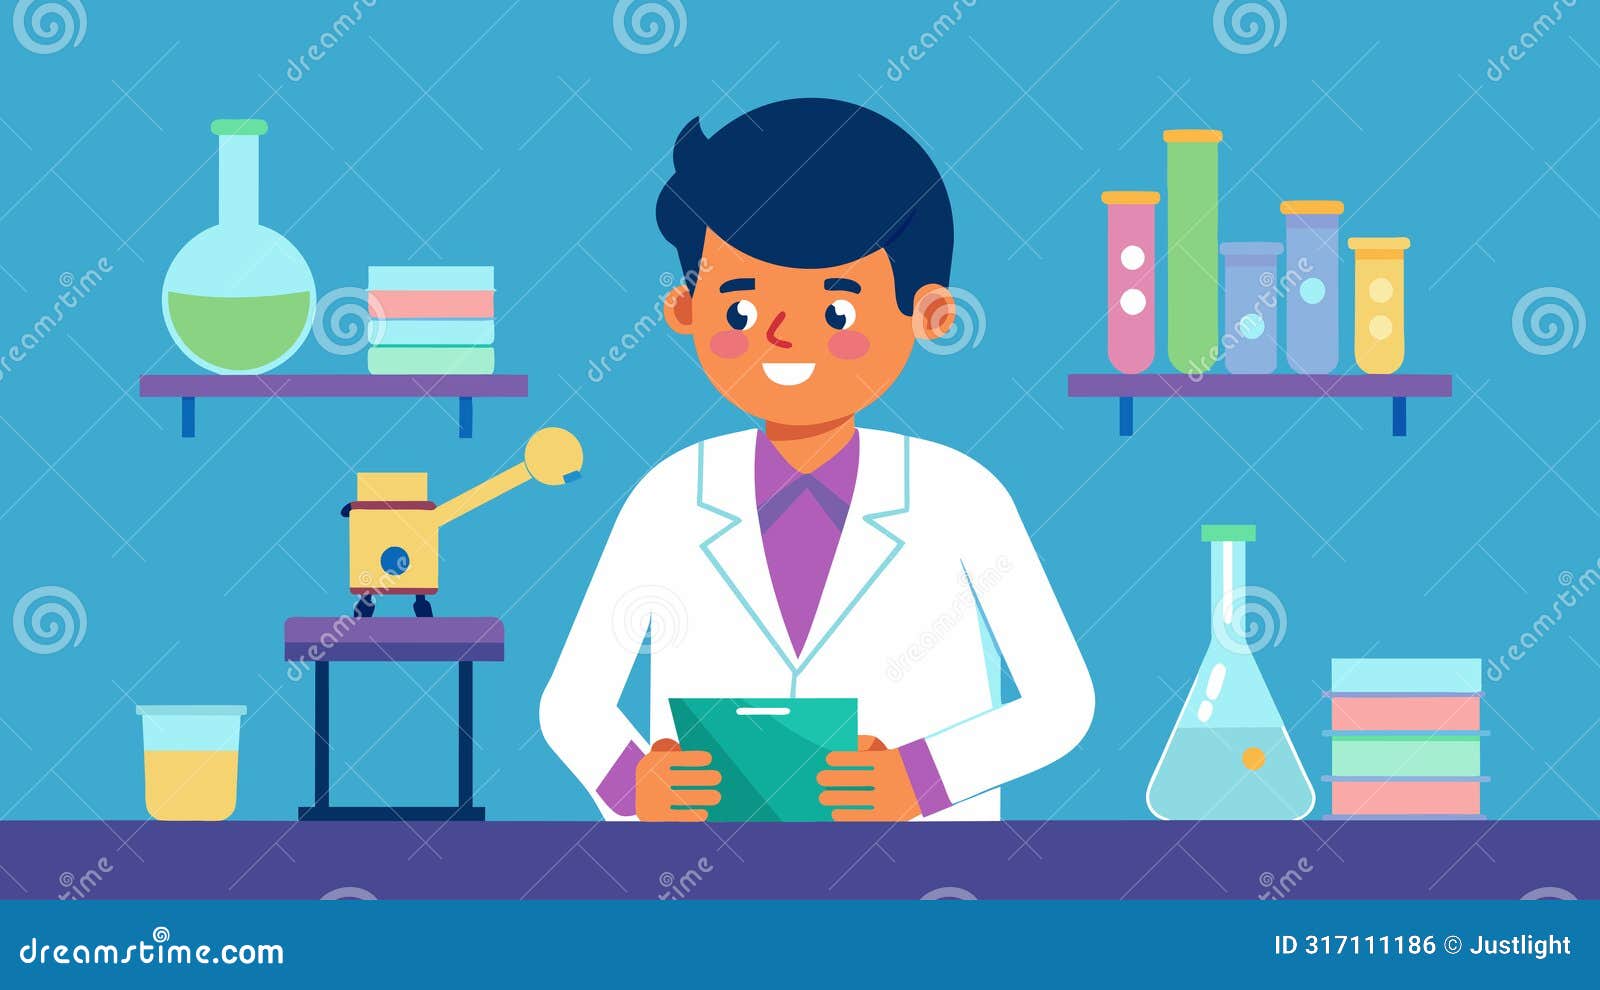 a student in a lab coat diligently working in a research laboratory after school saving the money she earns to fund her